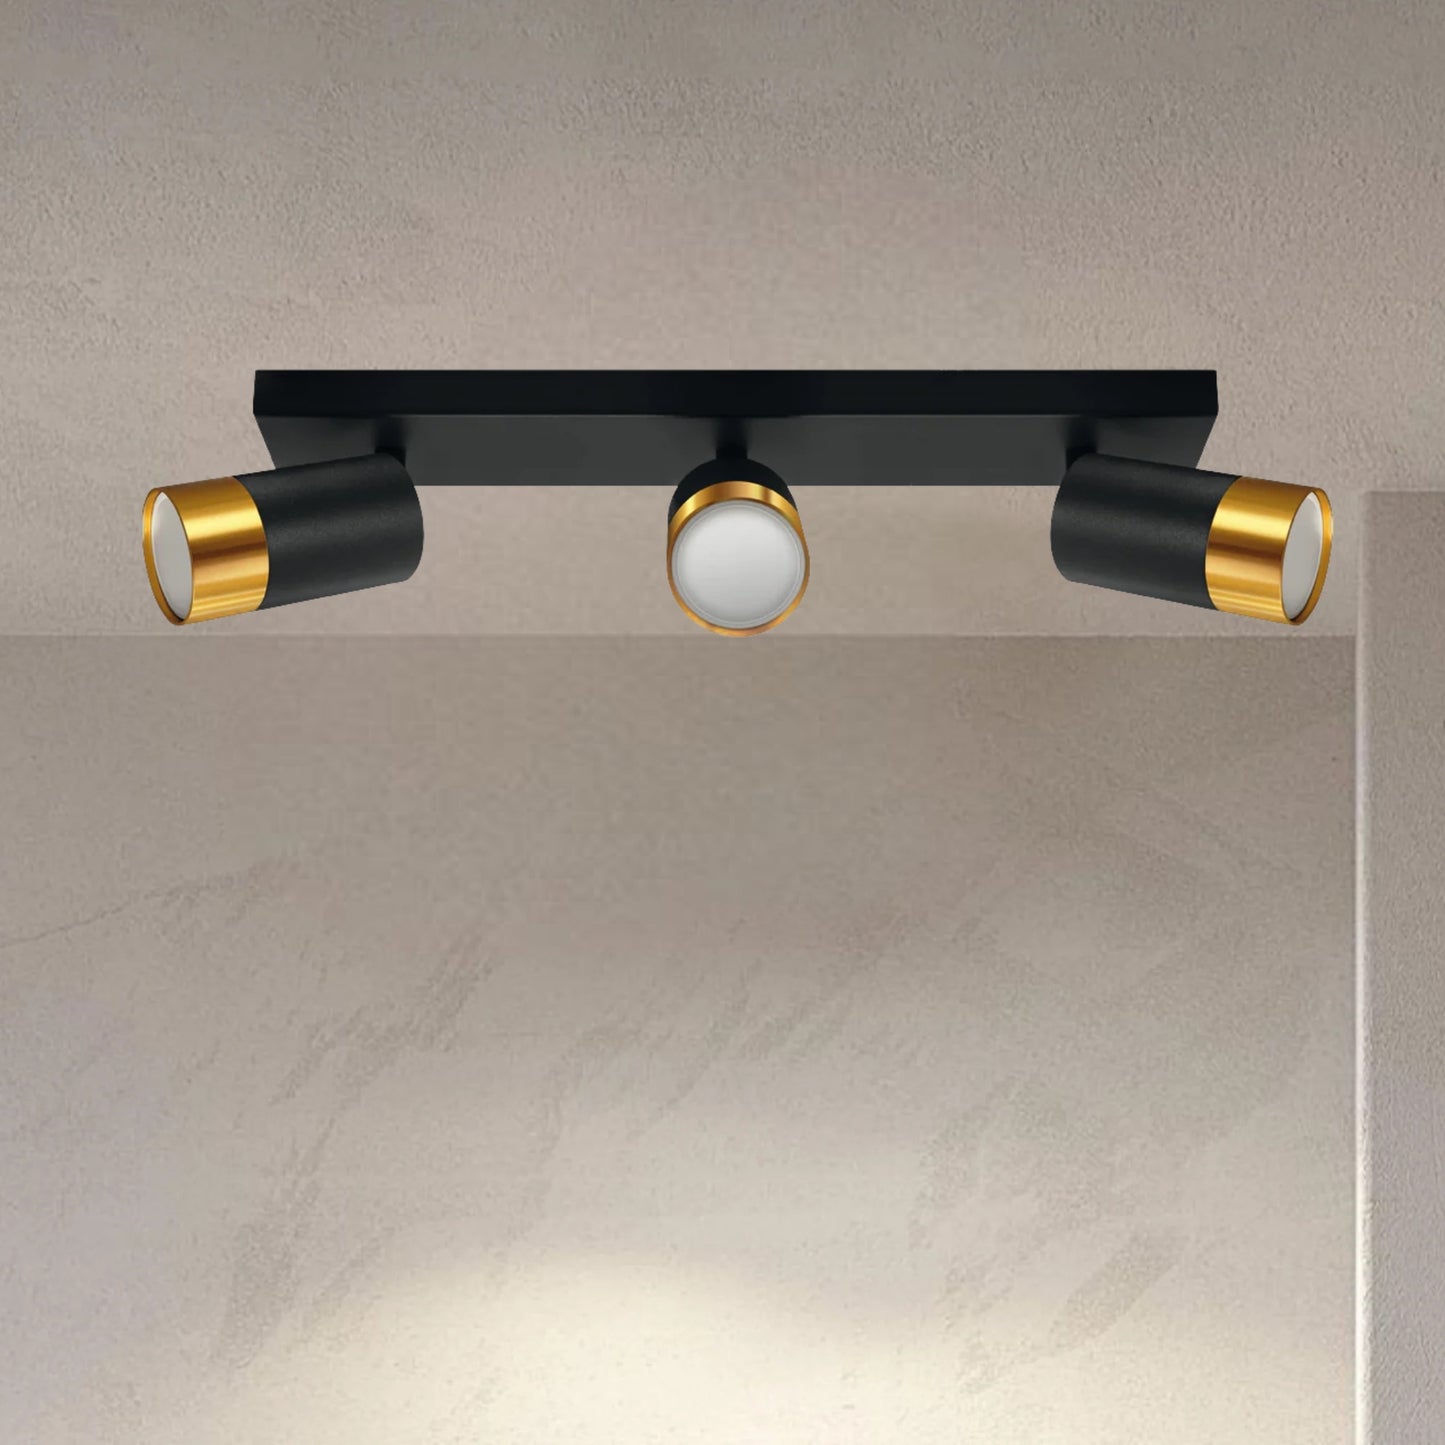 Puzon's elegant and stylish finish makes it the ideal accent to any room. It will look perfect in both traditional and modern environments. It has three adjustable heads so you can set the spot lights according to your preferences. For longevity and durability, the lamp is constructed of aluminium that has been powder coated black and finished with gold detailing. It has an IP20 level of protection, making it touch and dust resistant. Intended for internal use.